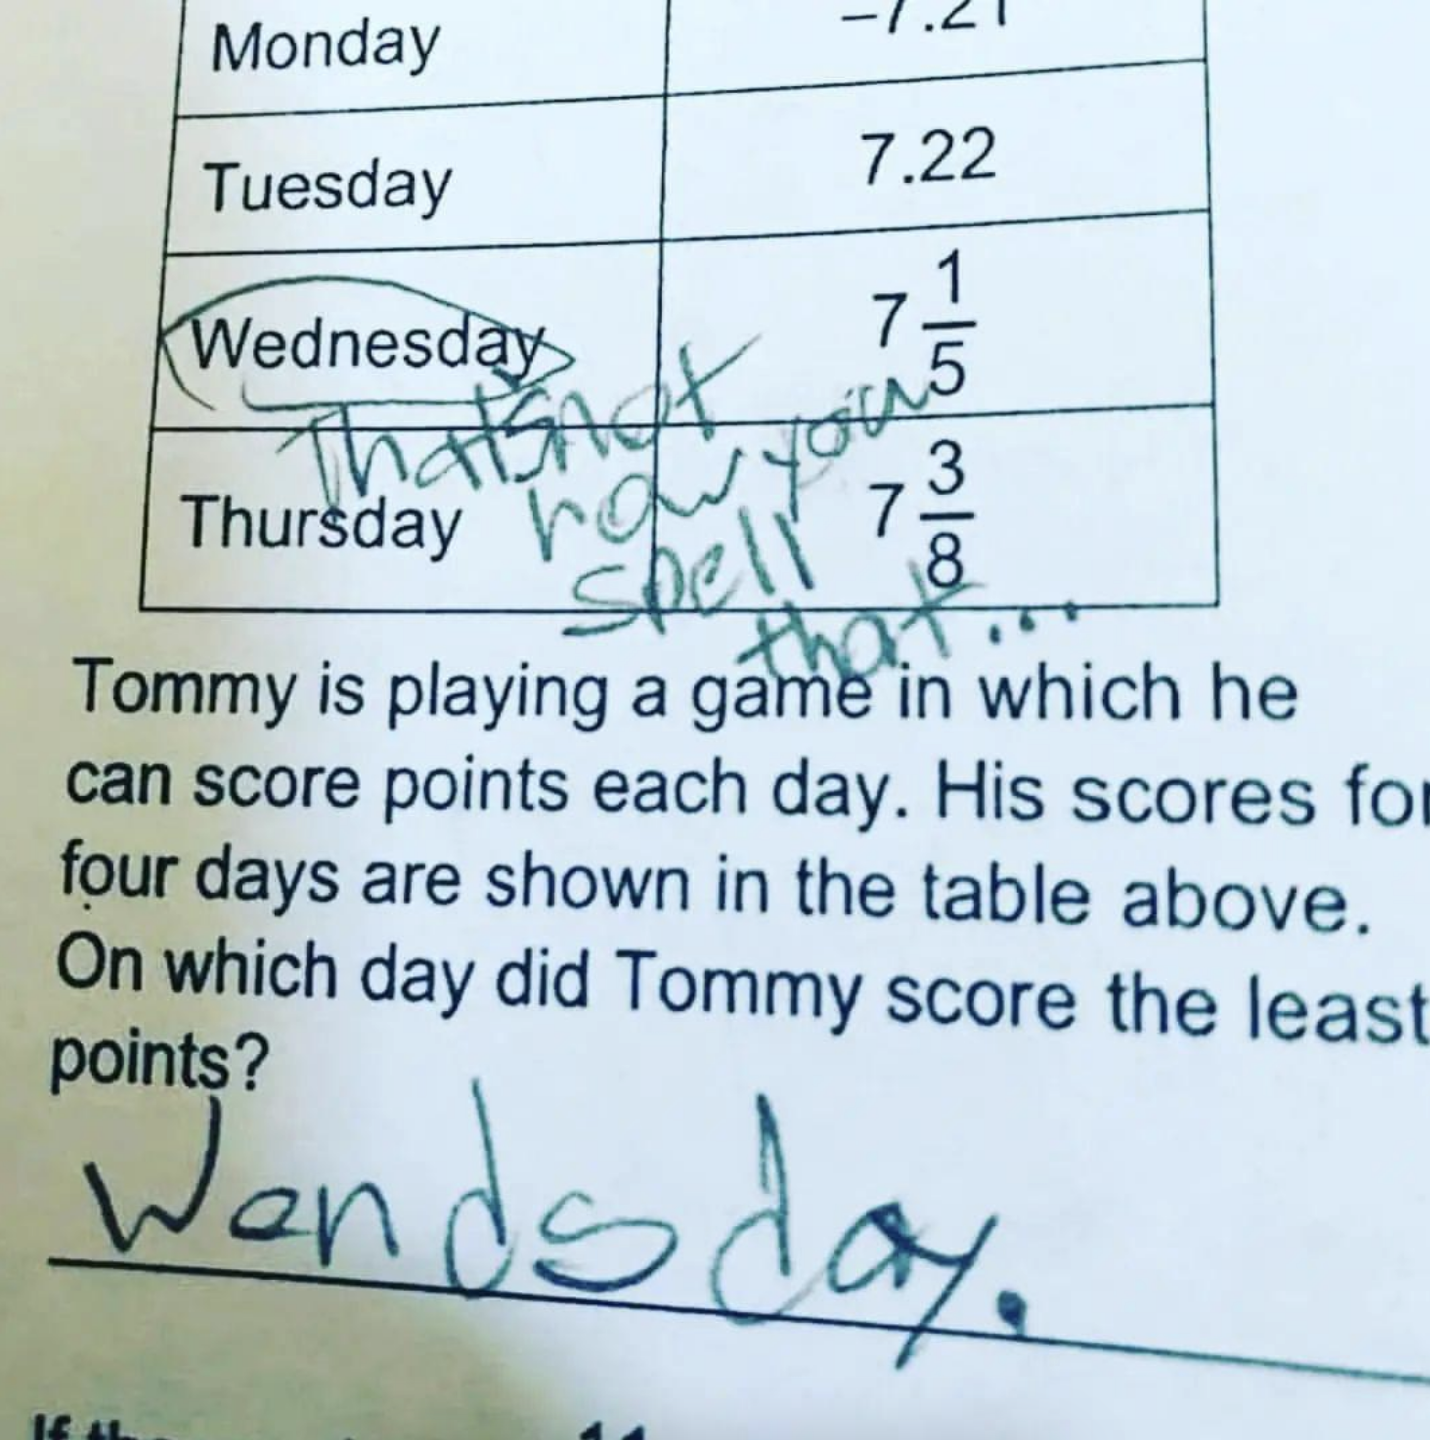 Student said &quot;Wednesday&quot; is not how you spell the word and wrote in &quot;Wendsday&quot;